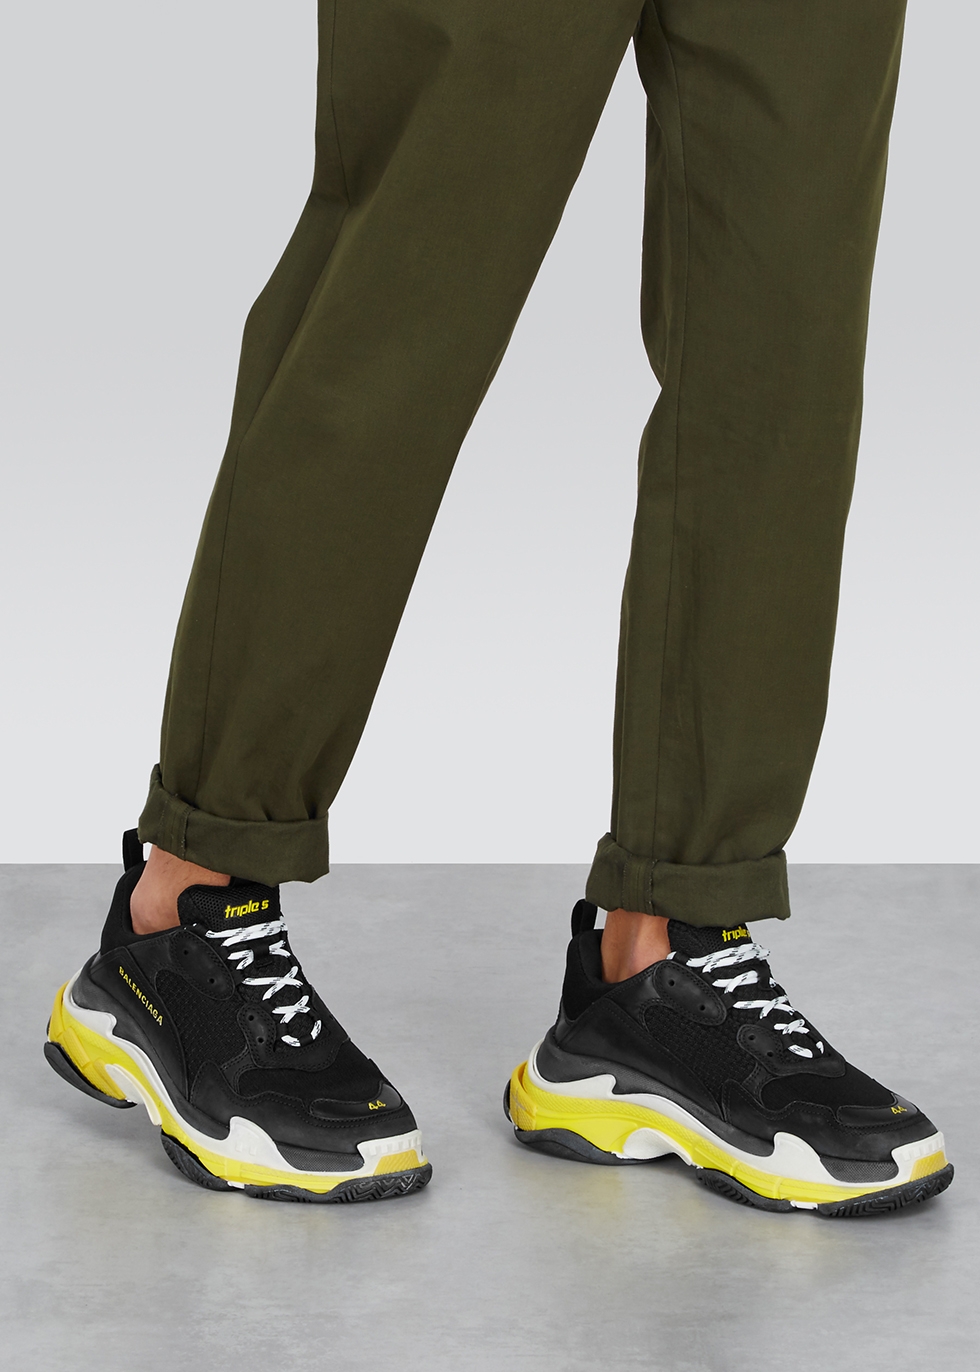 Buy Balenciaga Triple S Clear Sole Trainers Only $565